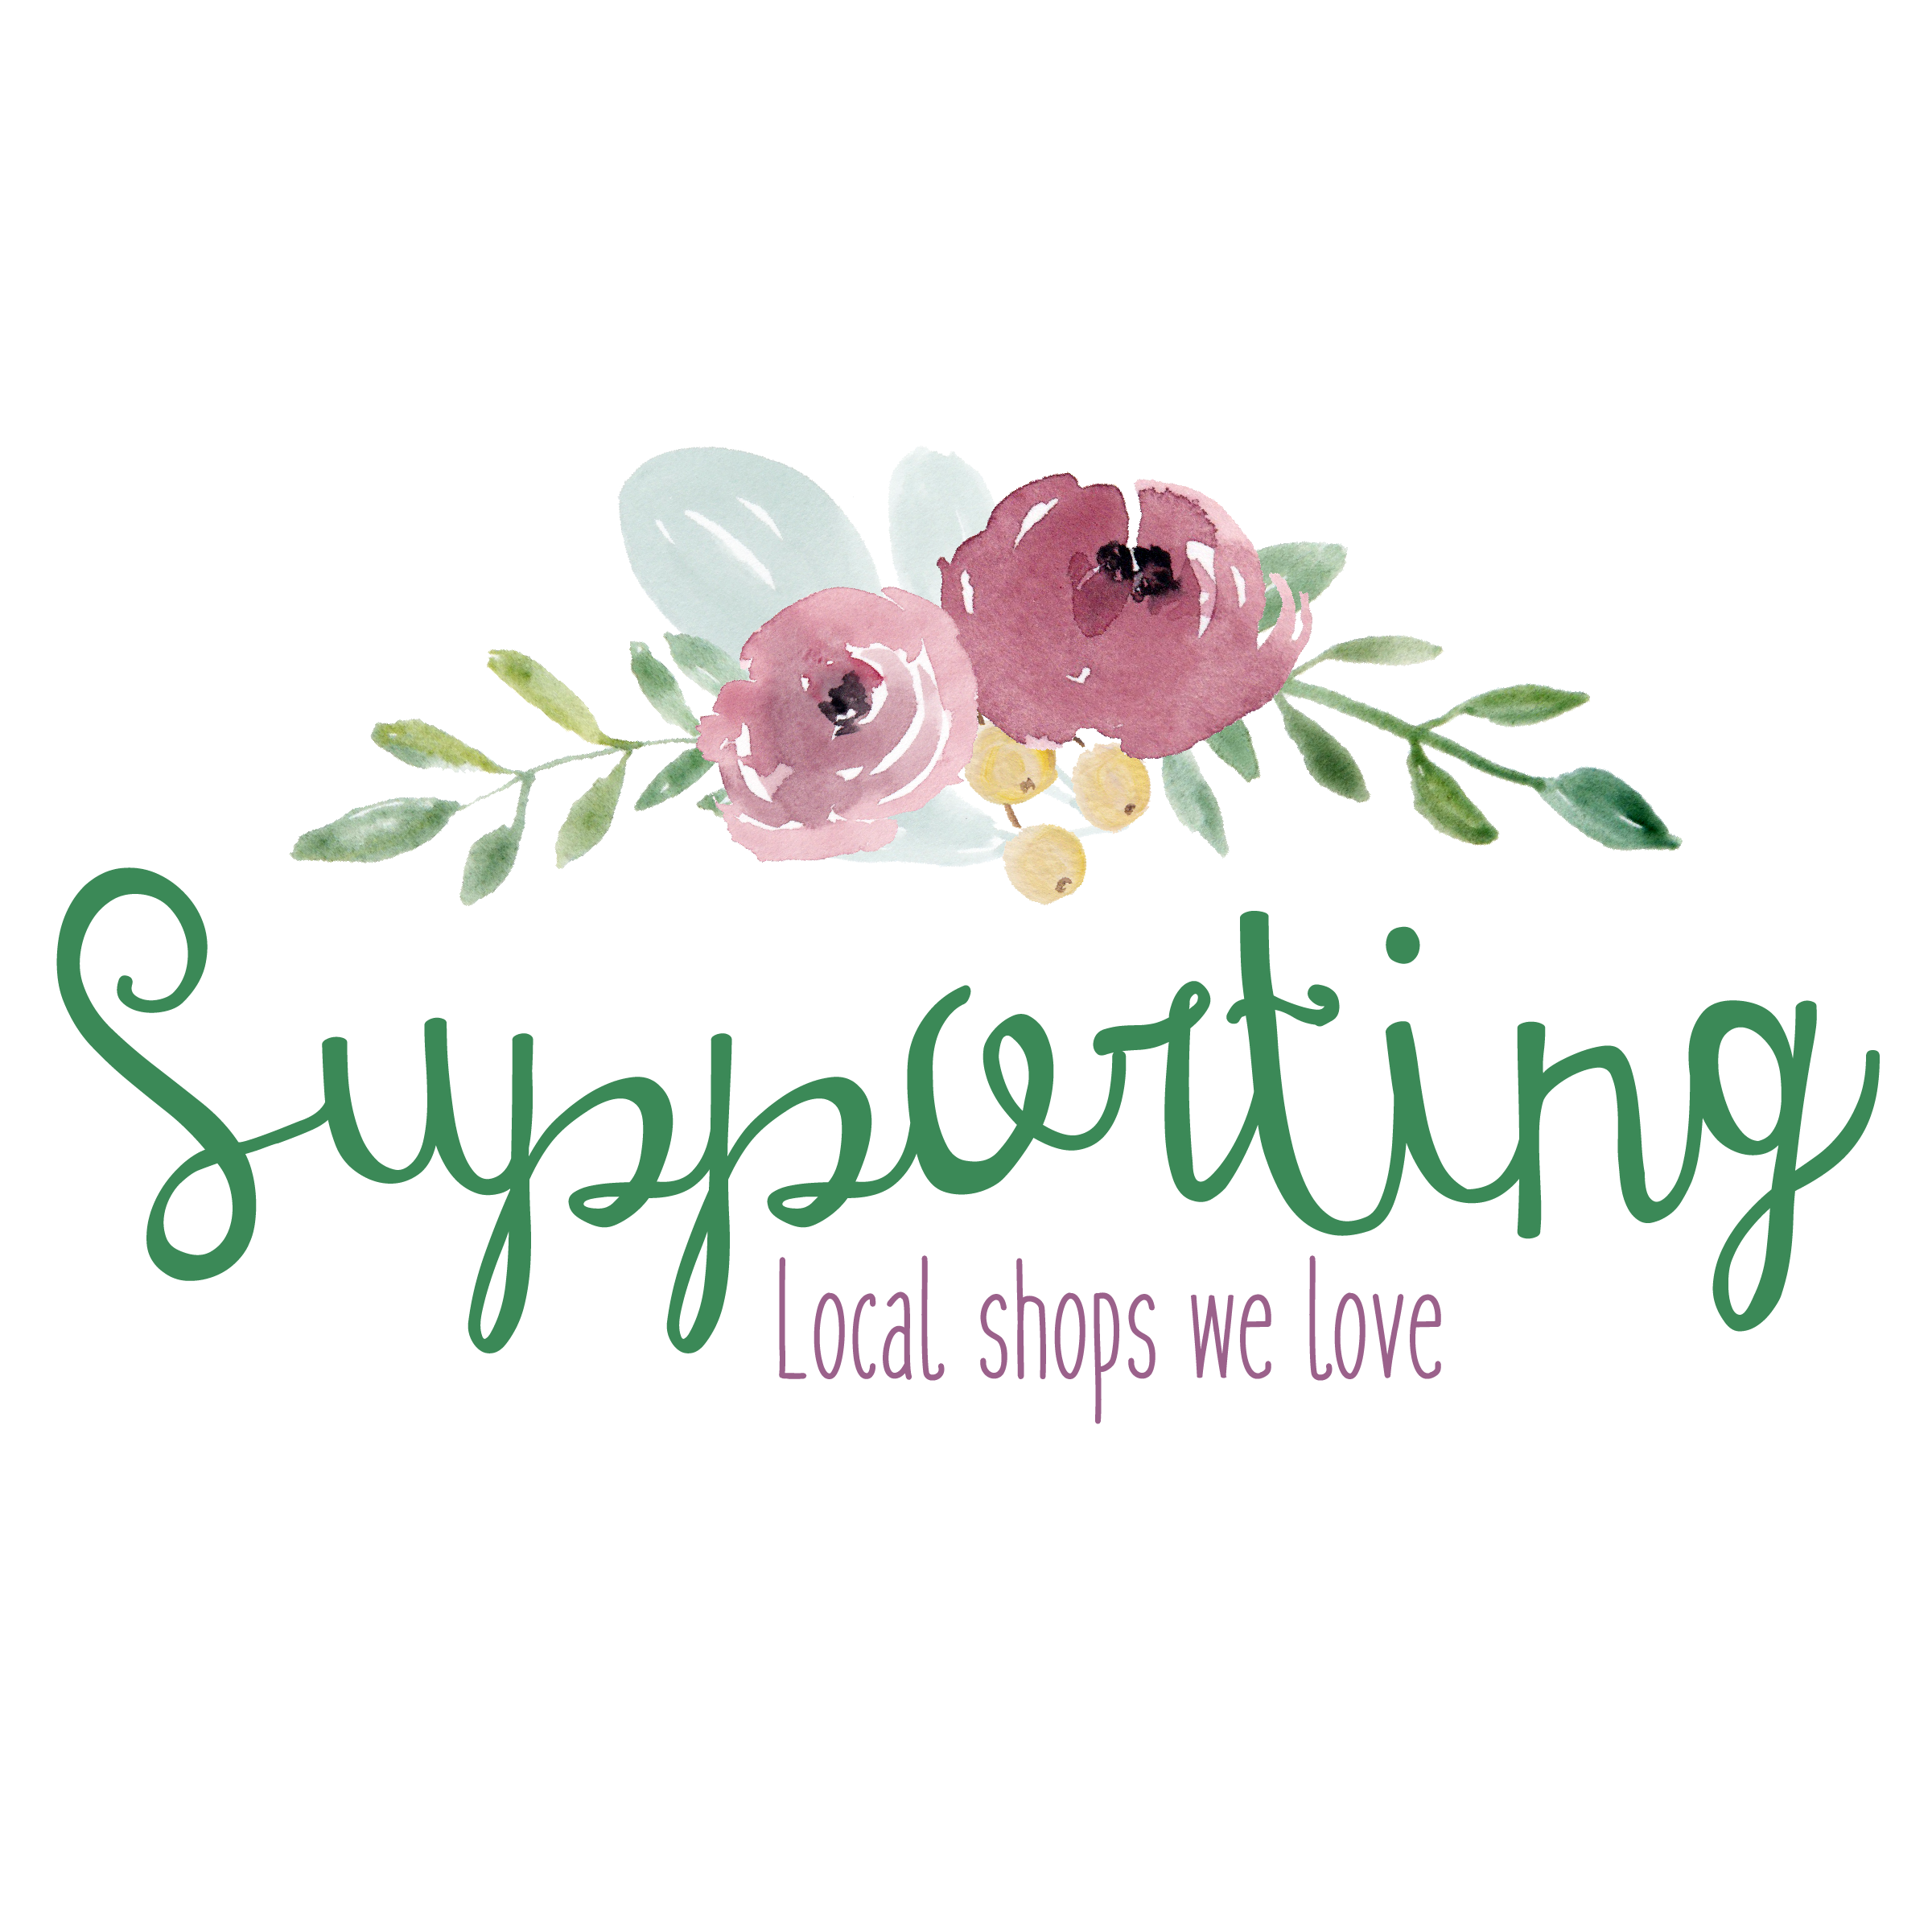 Supporting local shops we love-01.png